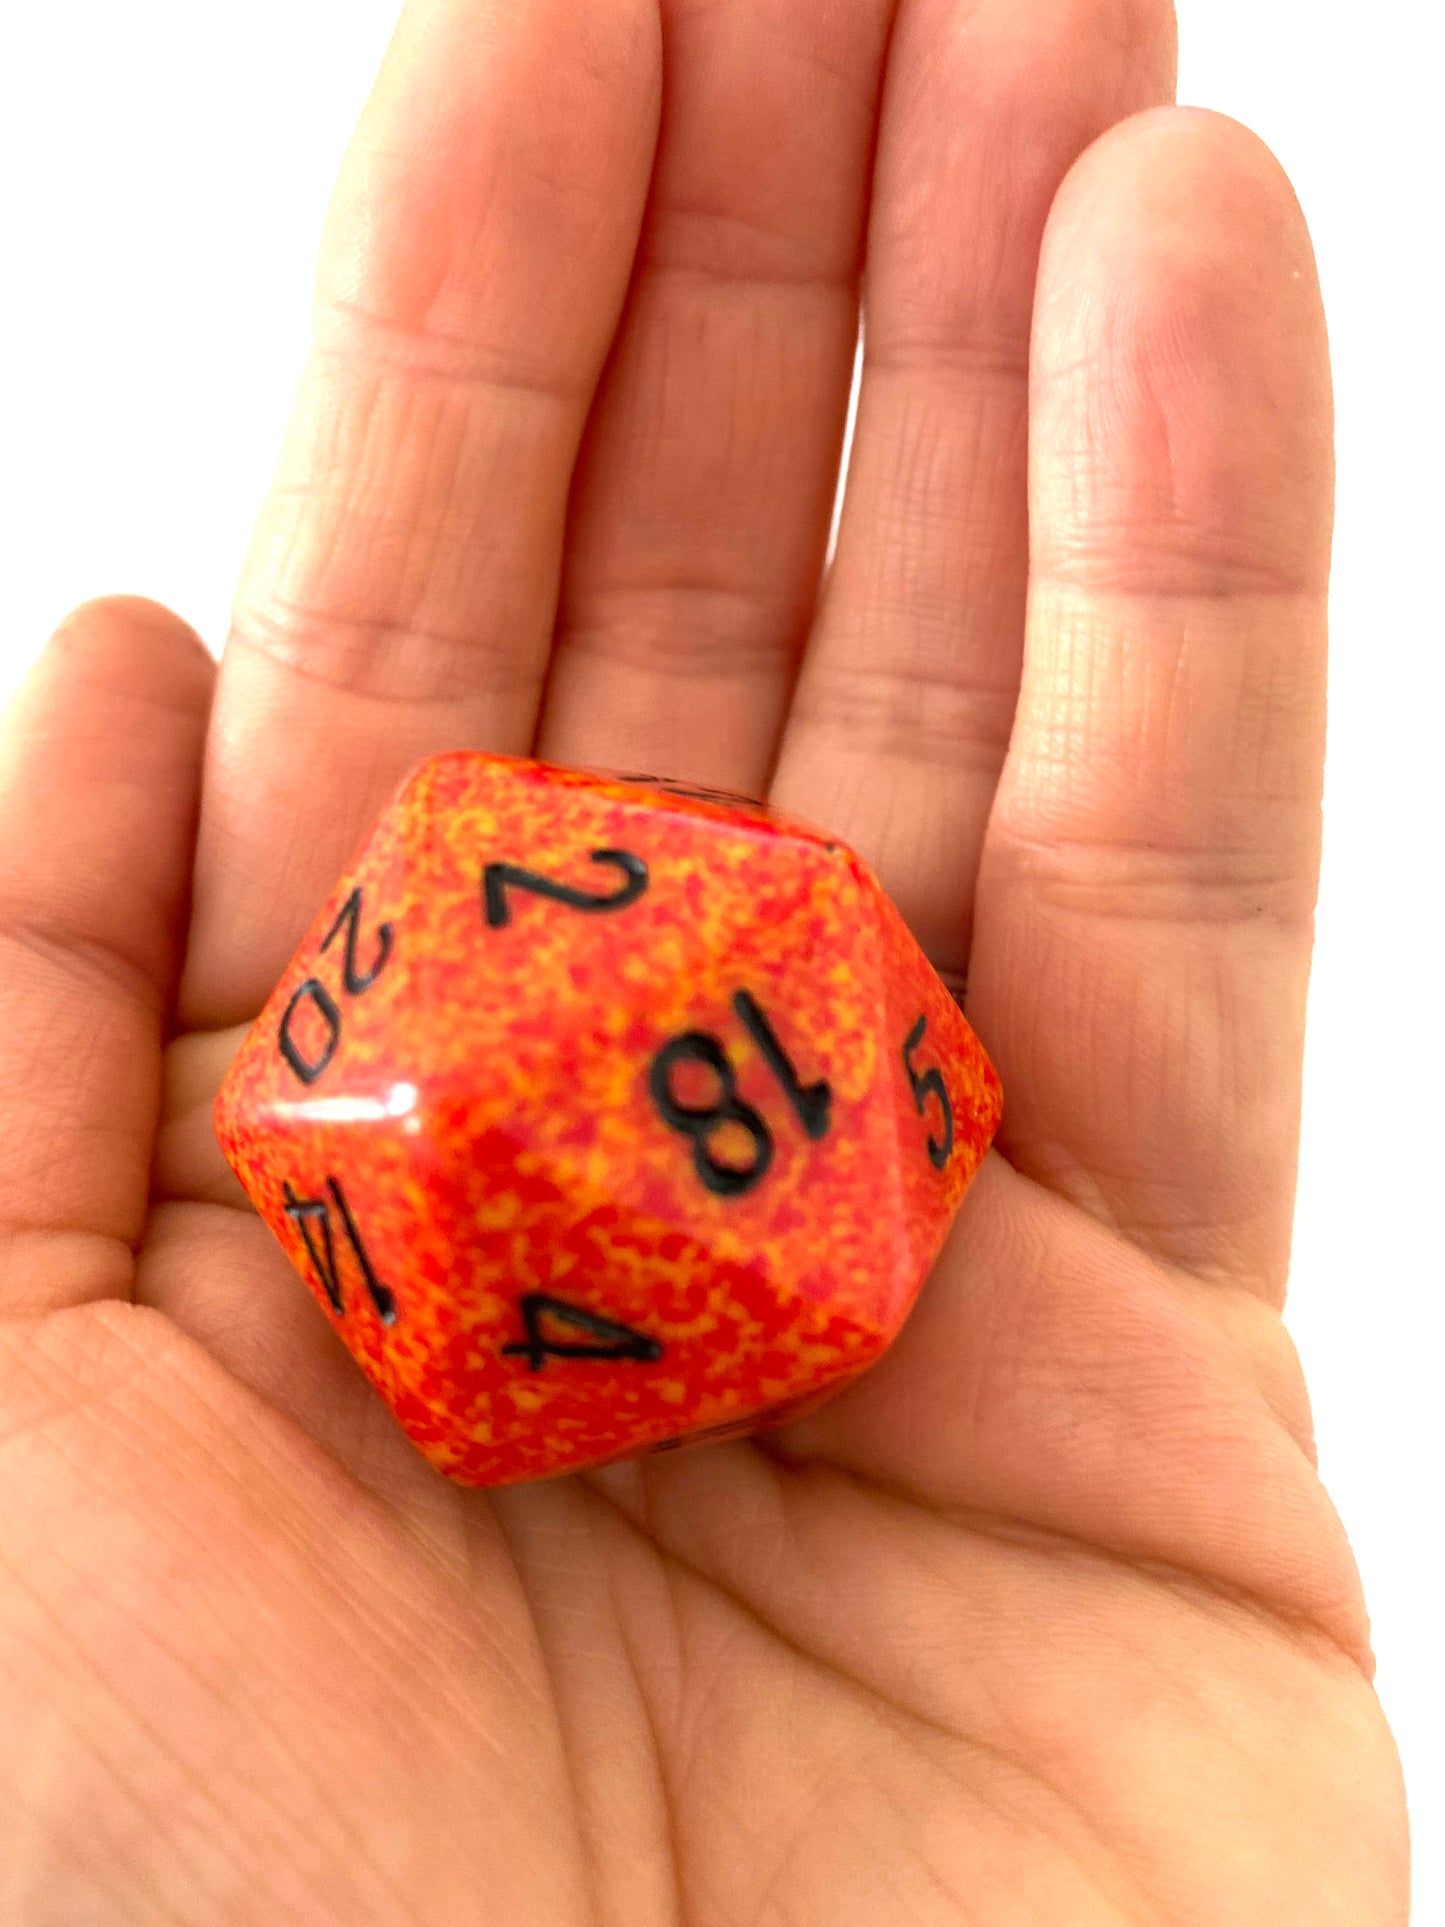 JUMBO D20 SPECKLED FIRE